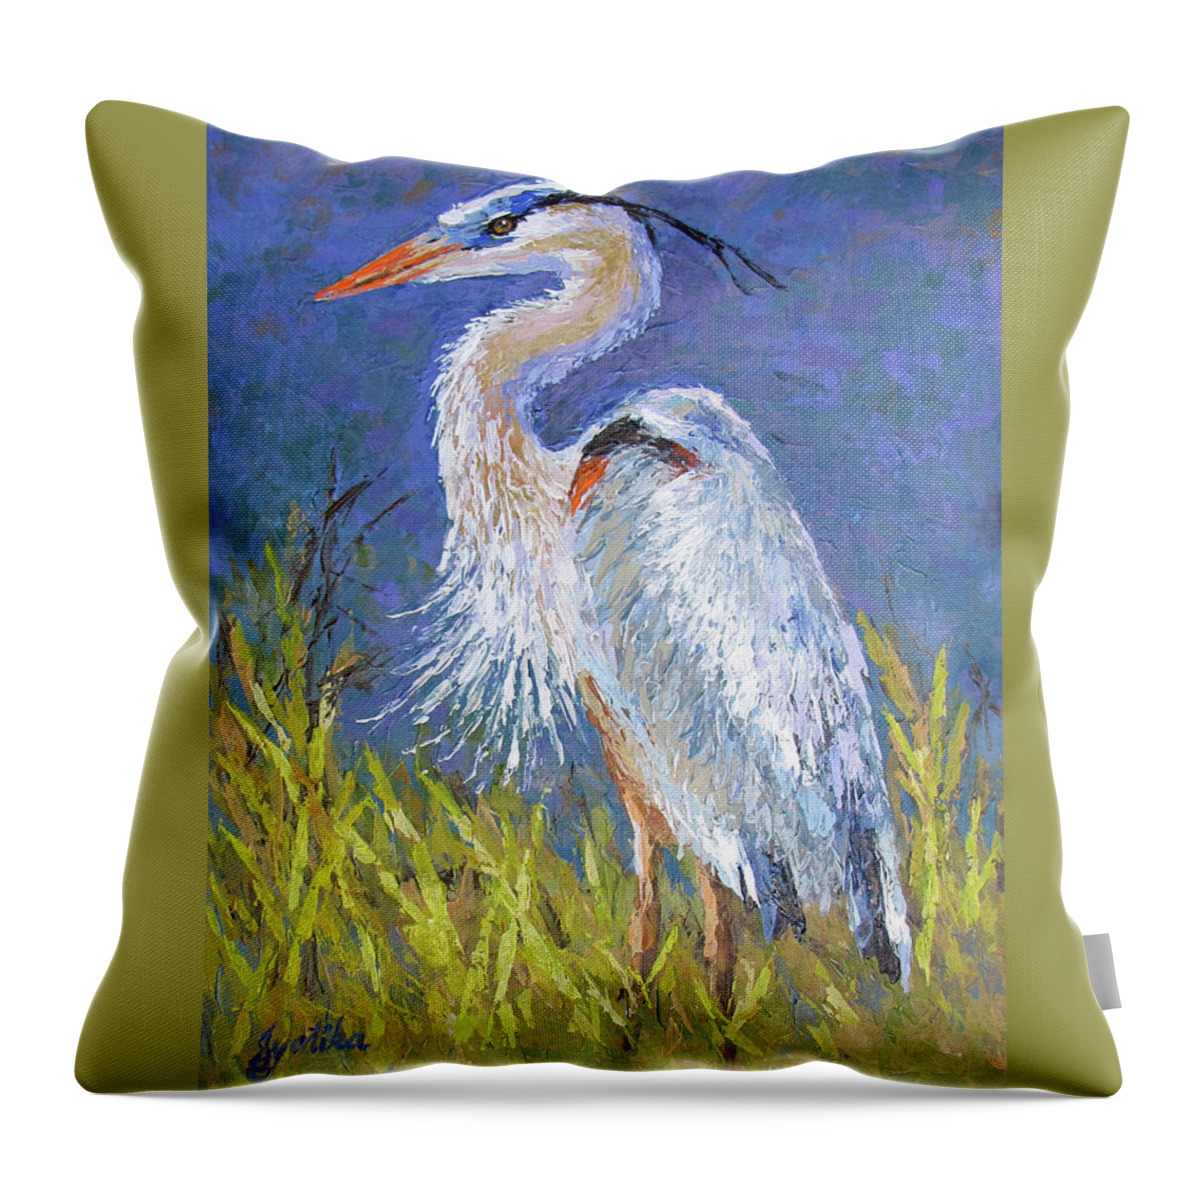 Bird Throw Pillow featuring the painting Great Blue Heron by Jyotika Shroff